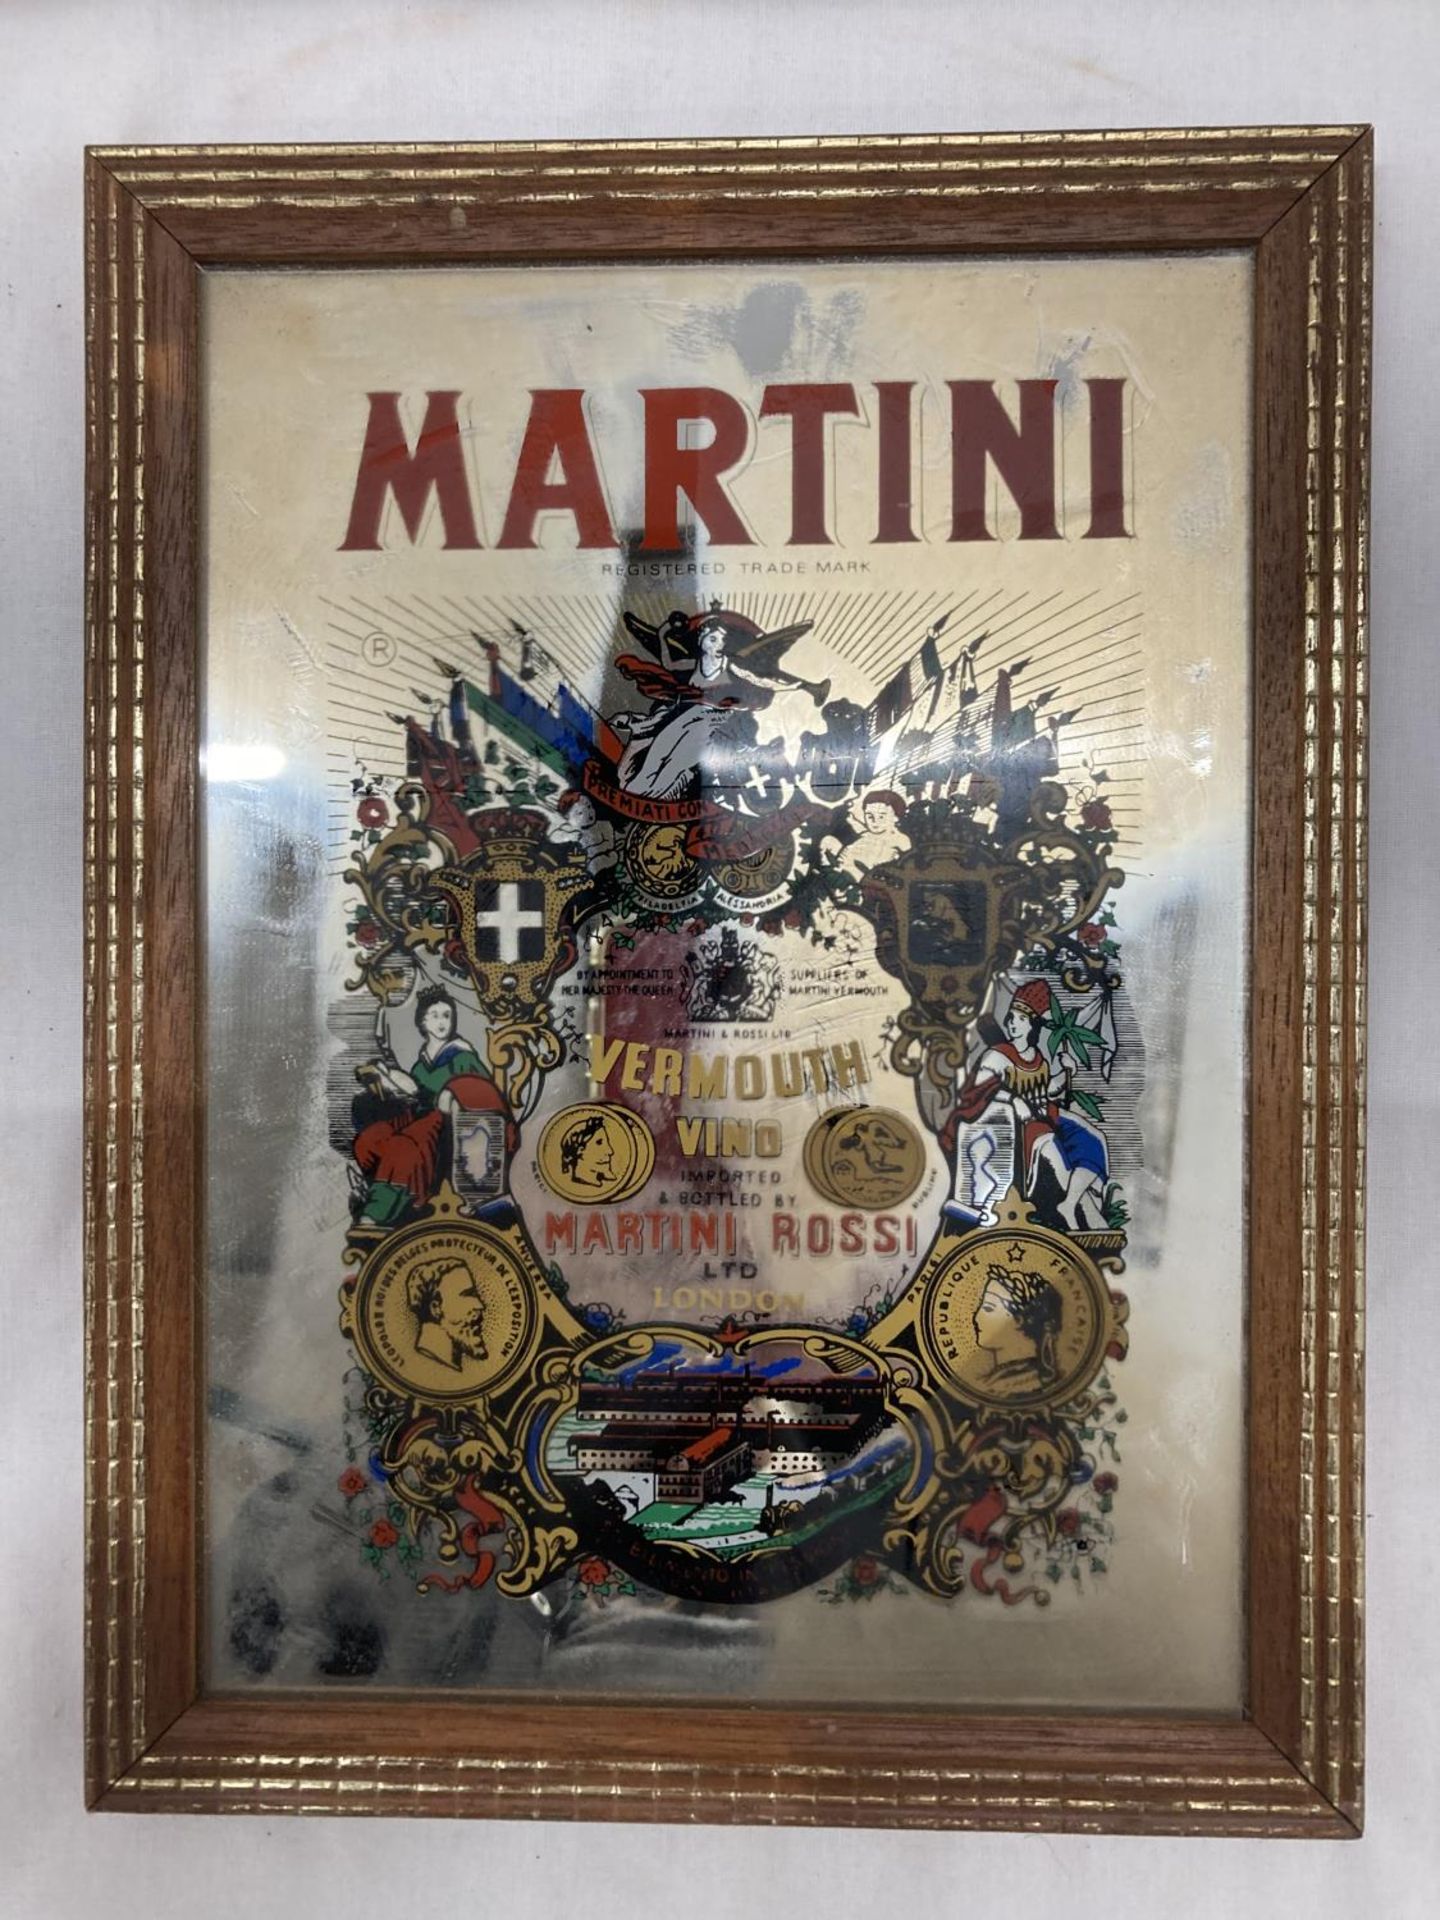 A SMALL VINTAGE MARTINI ROSSI ADVERTISING MIRROR, 20CM X 27CM - Image 2 of 2